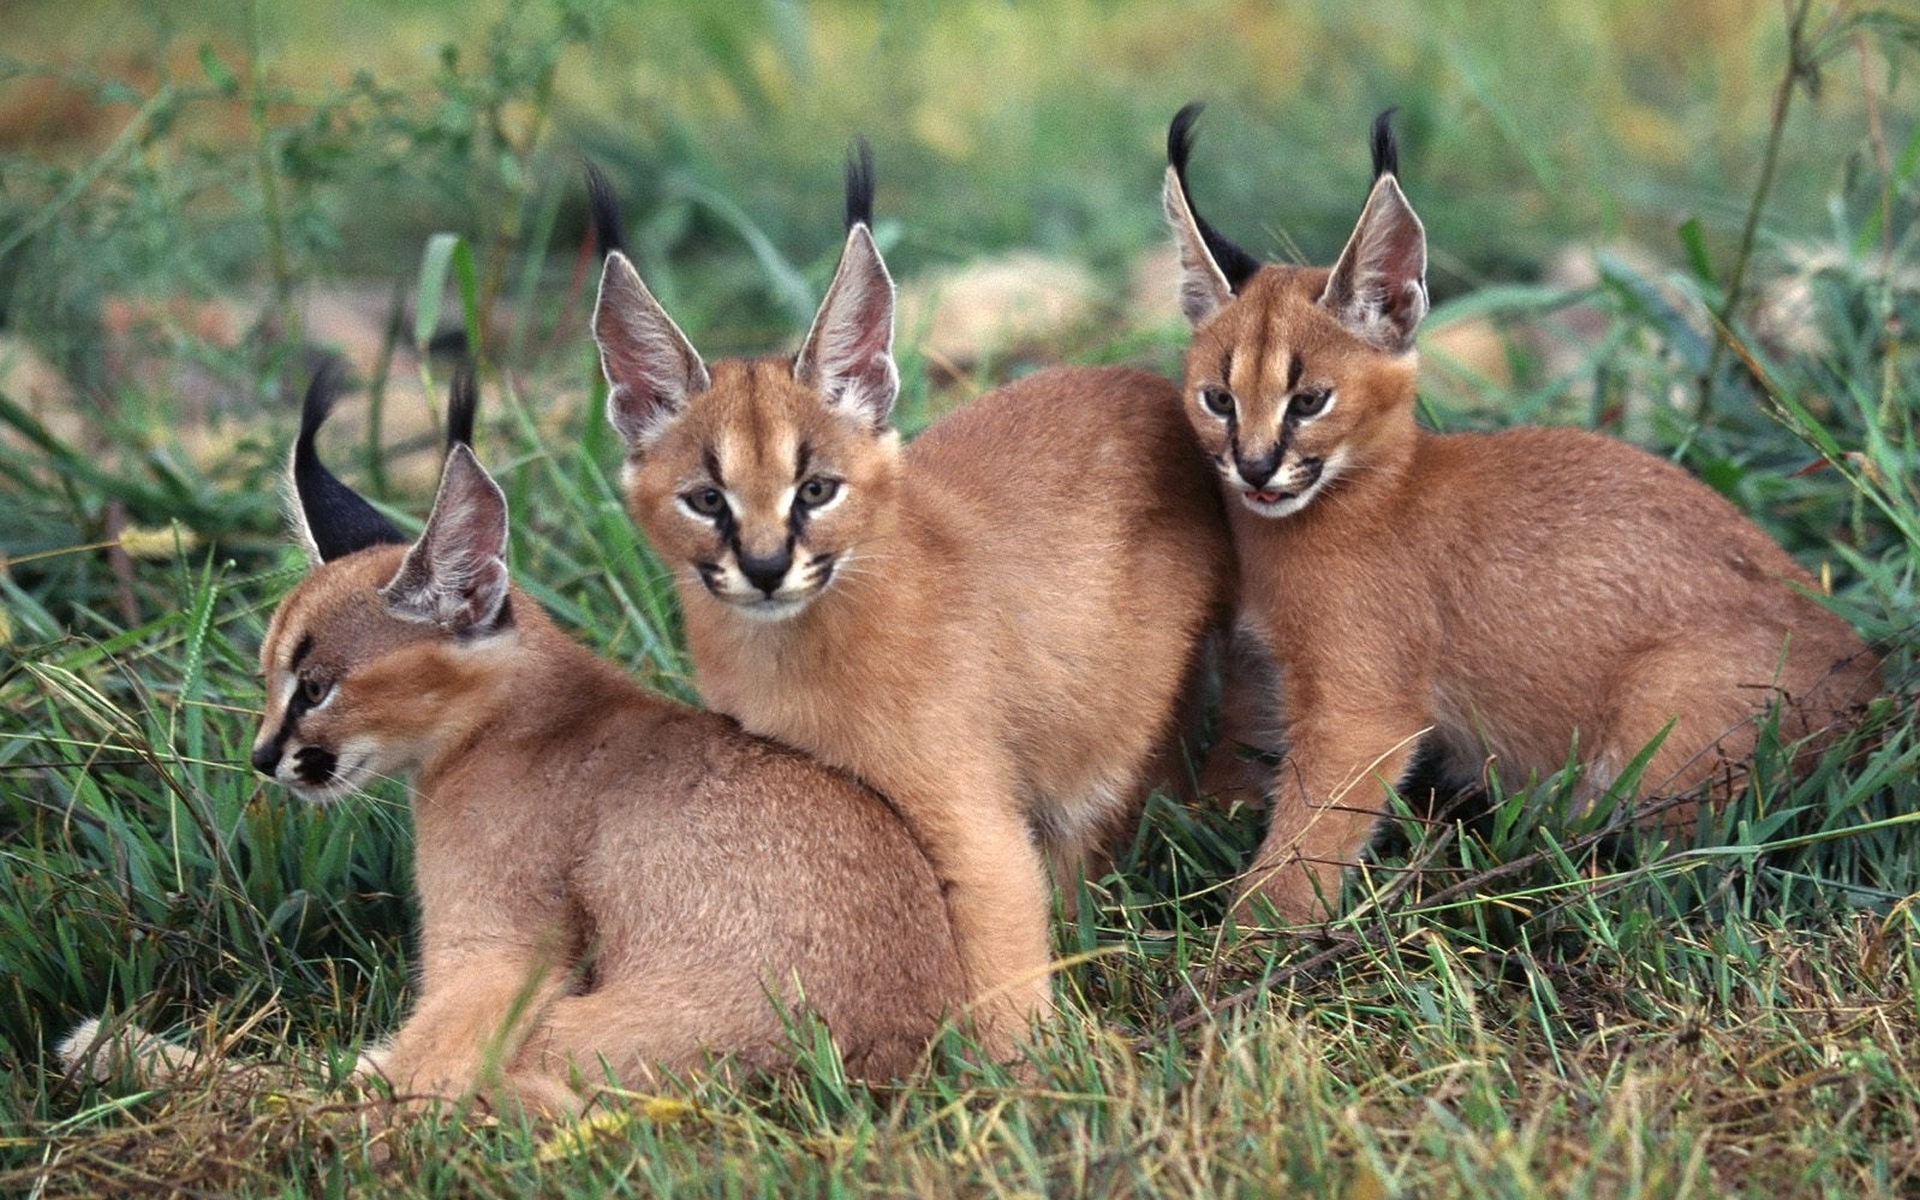 caracal, group of animals, mammal, grass, vertebrate, two animals